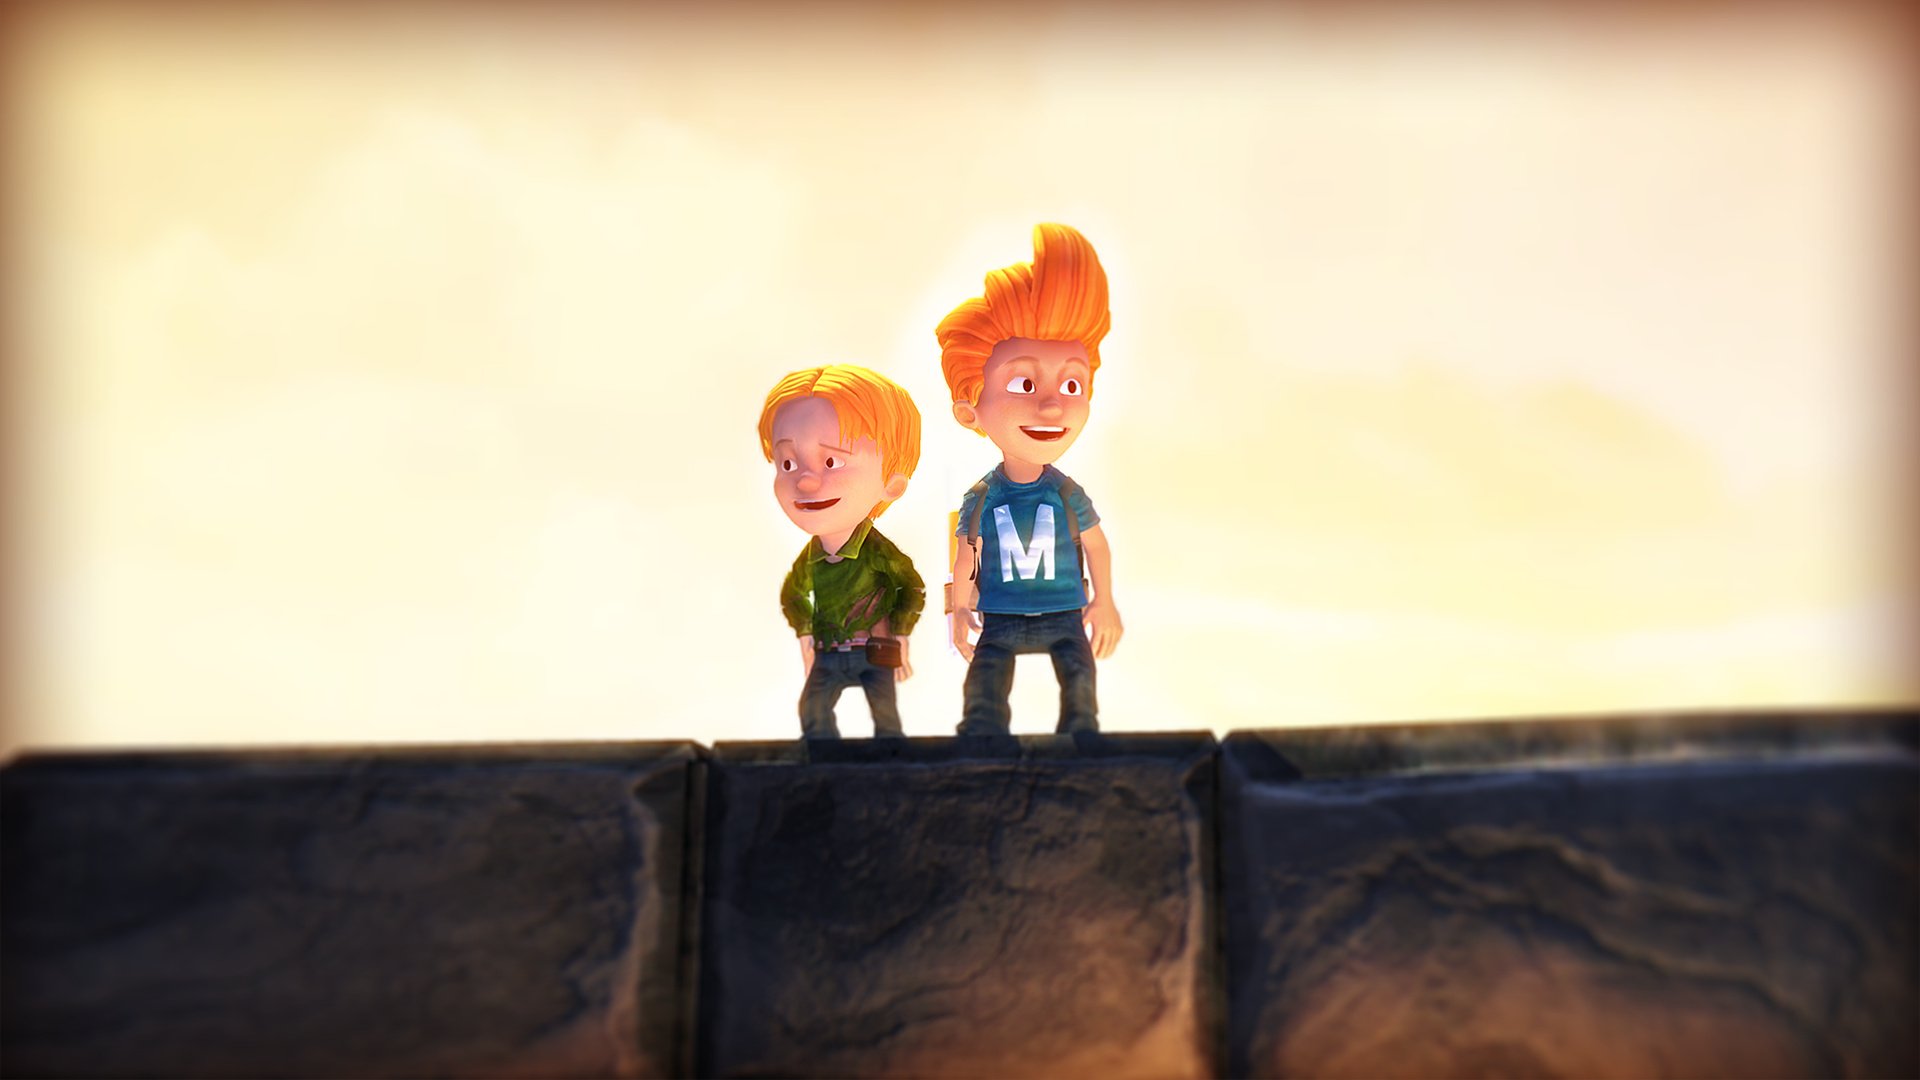 Max: The Curse of Brotherhood Review – Xbox One – Game Chronicles